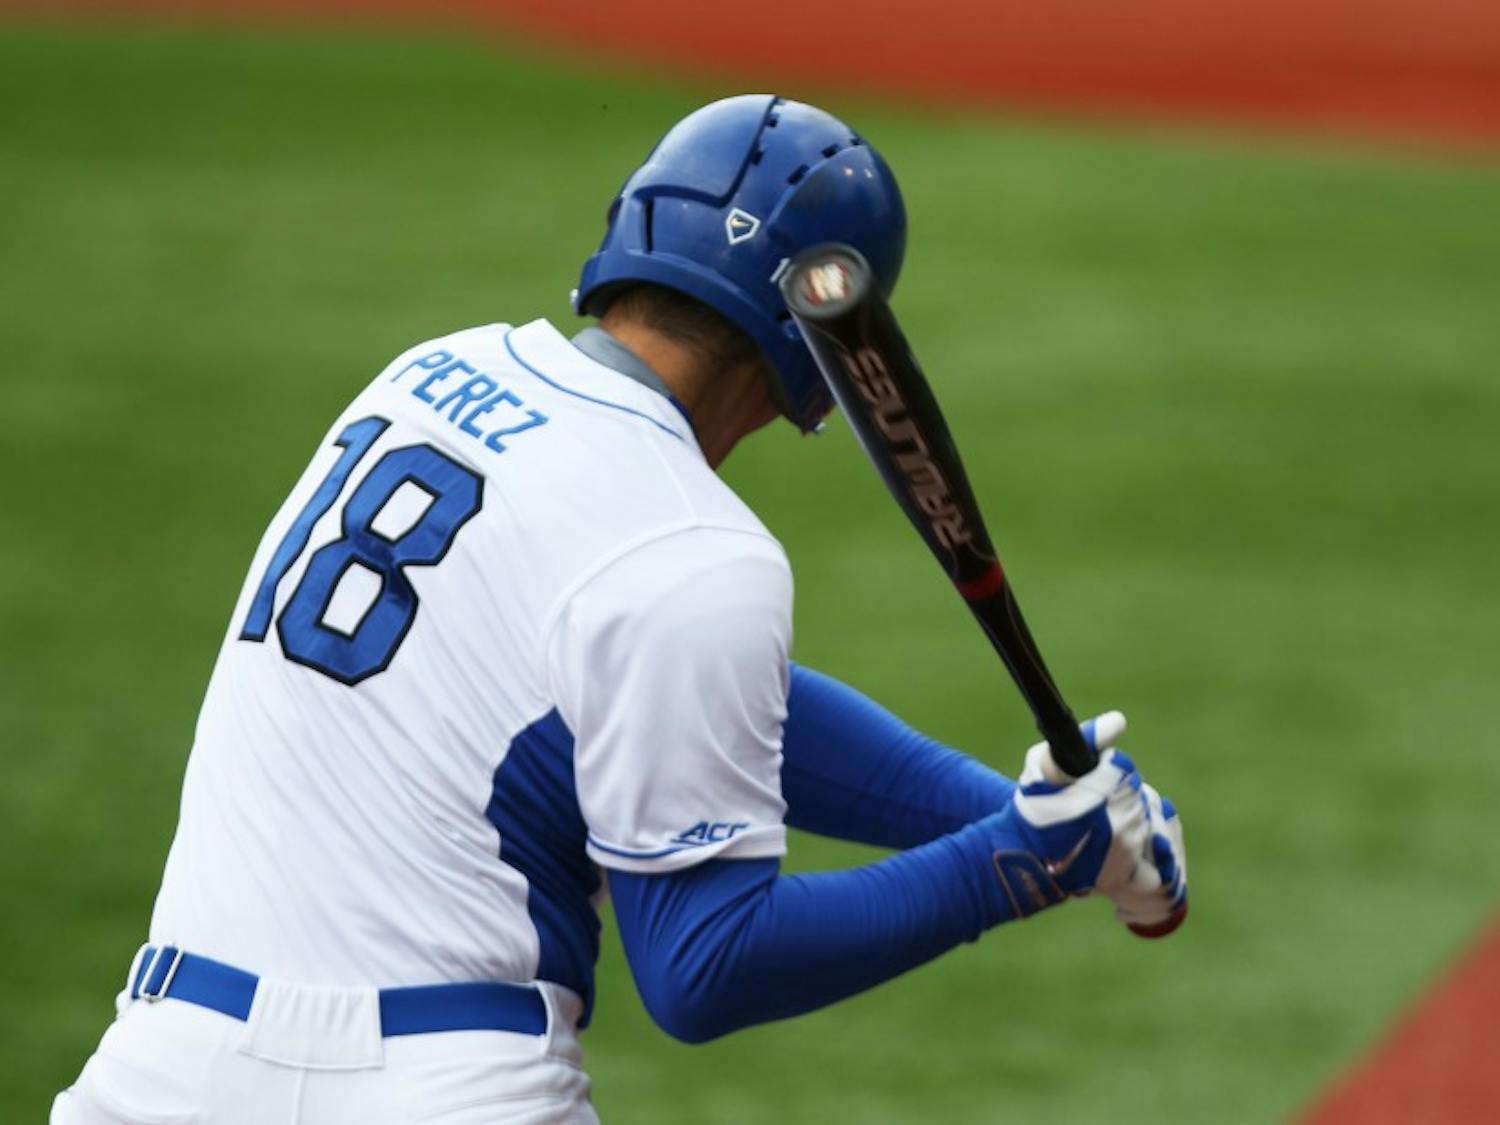 Sophomore designated hitter Cris Perez had a pair of hits in Sunday's loss to Virginia.